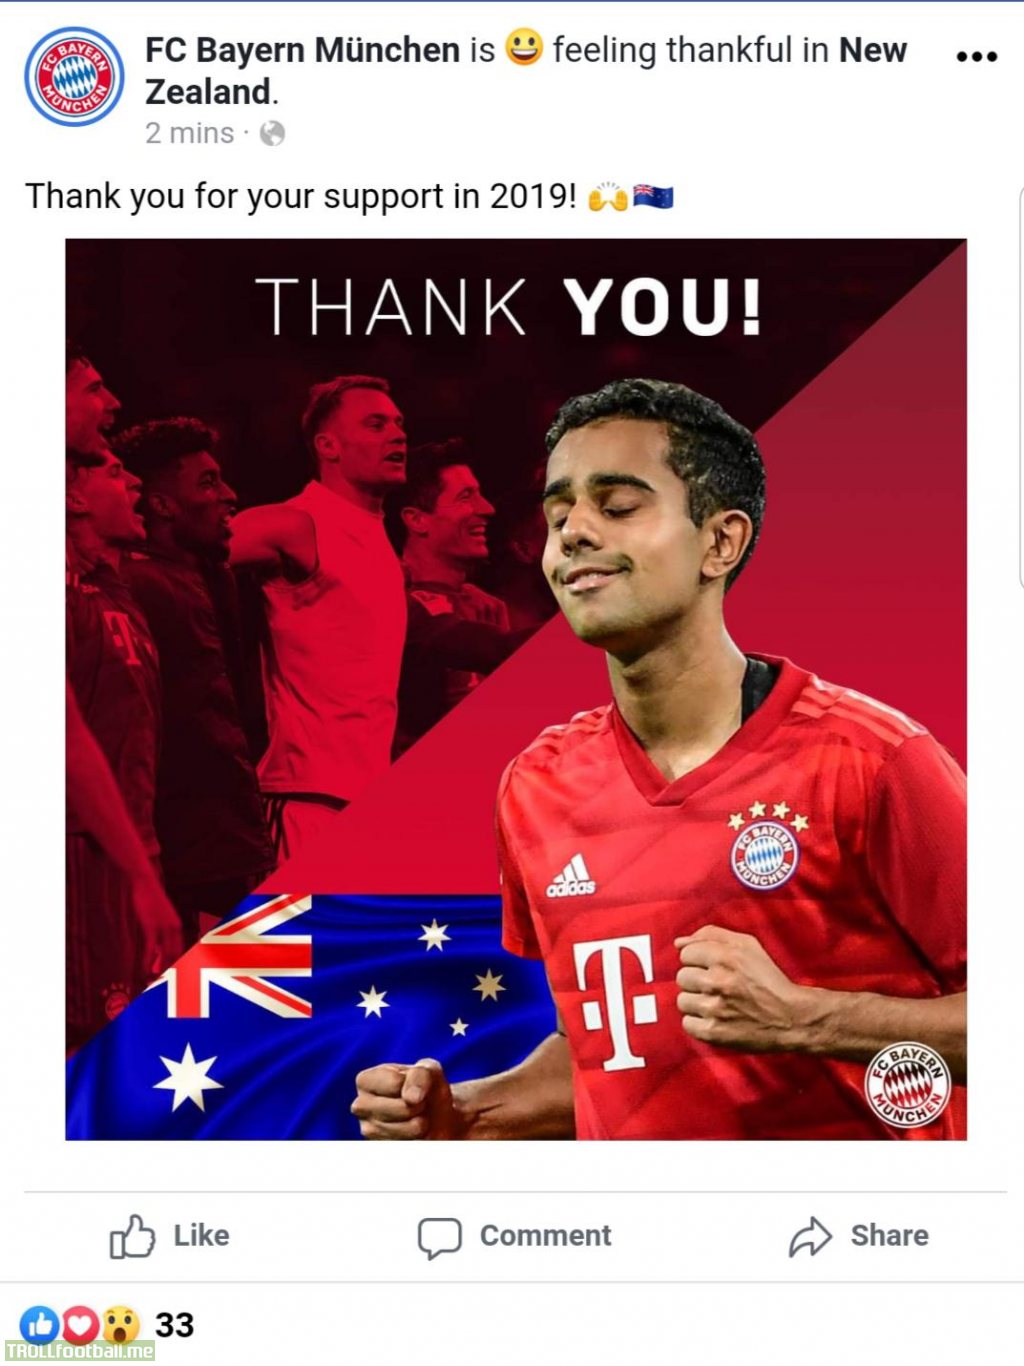 Bayern Munich thanking New Zealand fans for their support with a picture of NZ international Sarpreet Singh... and an Australian flag.